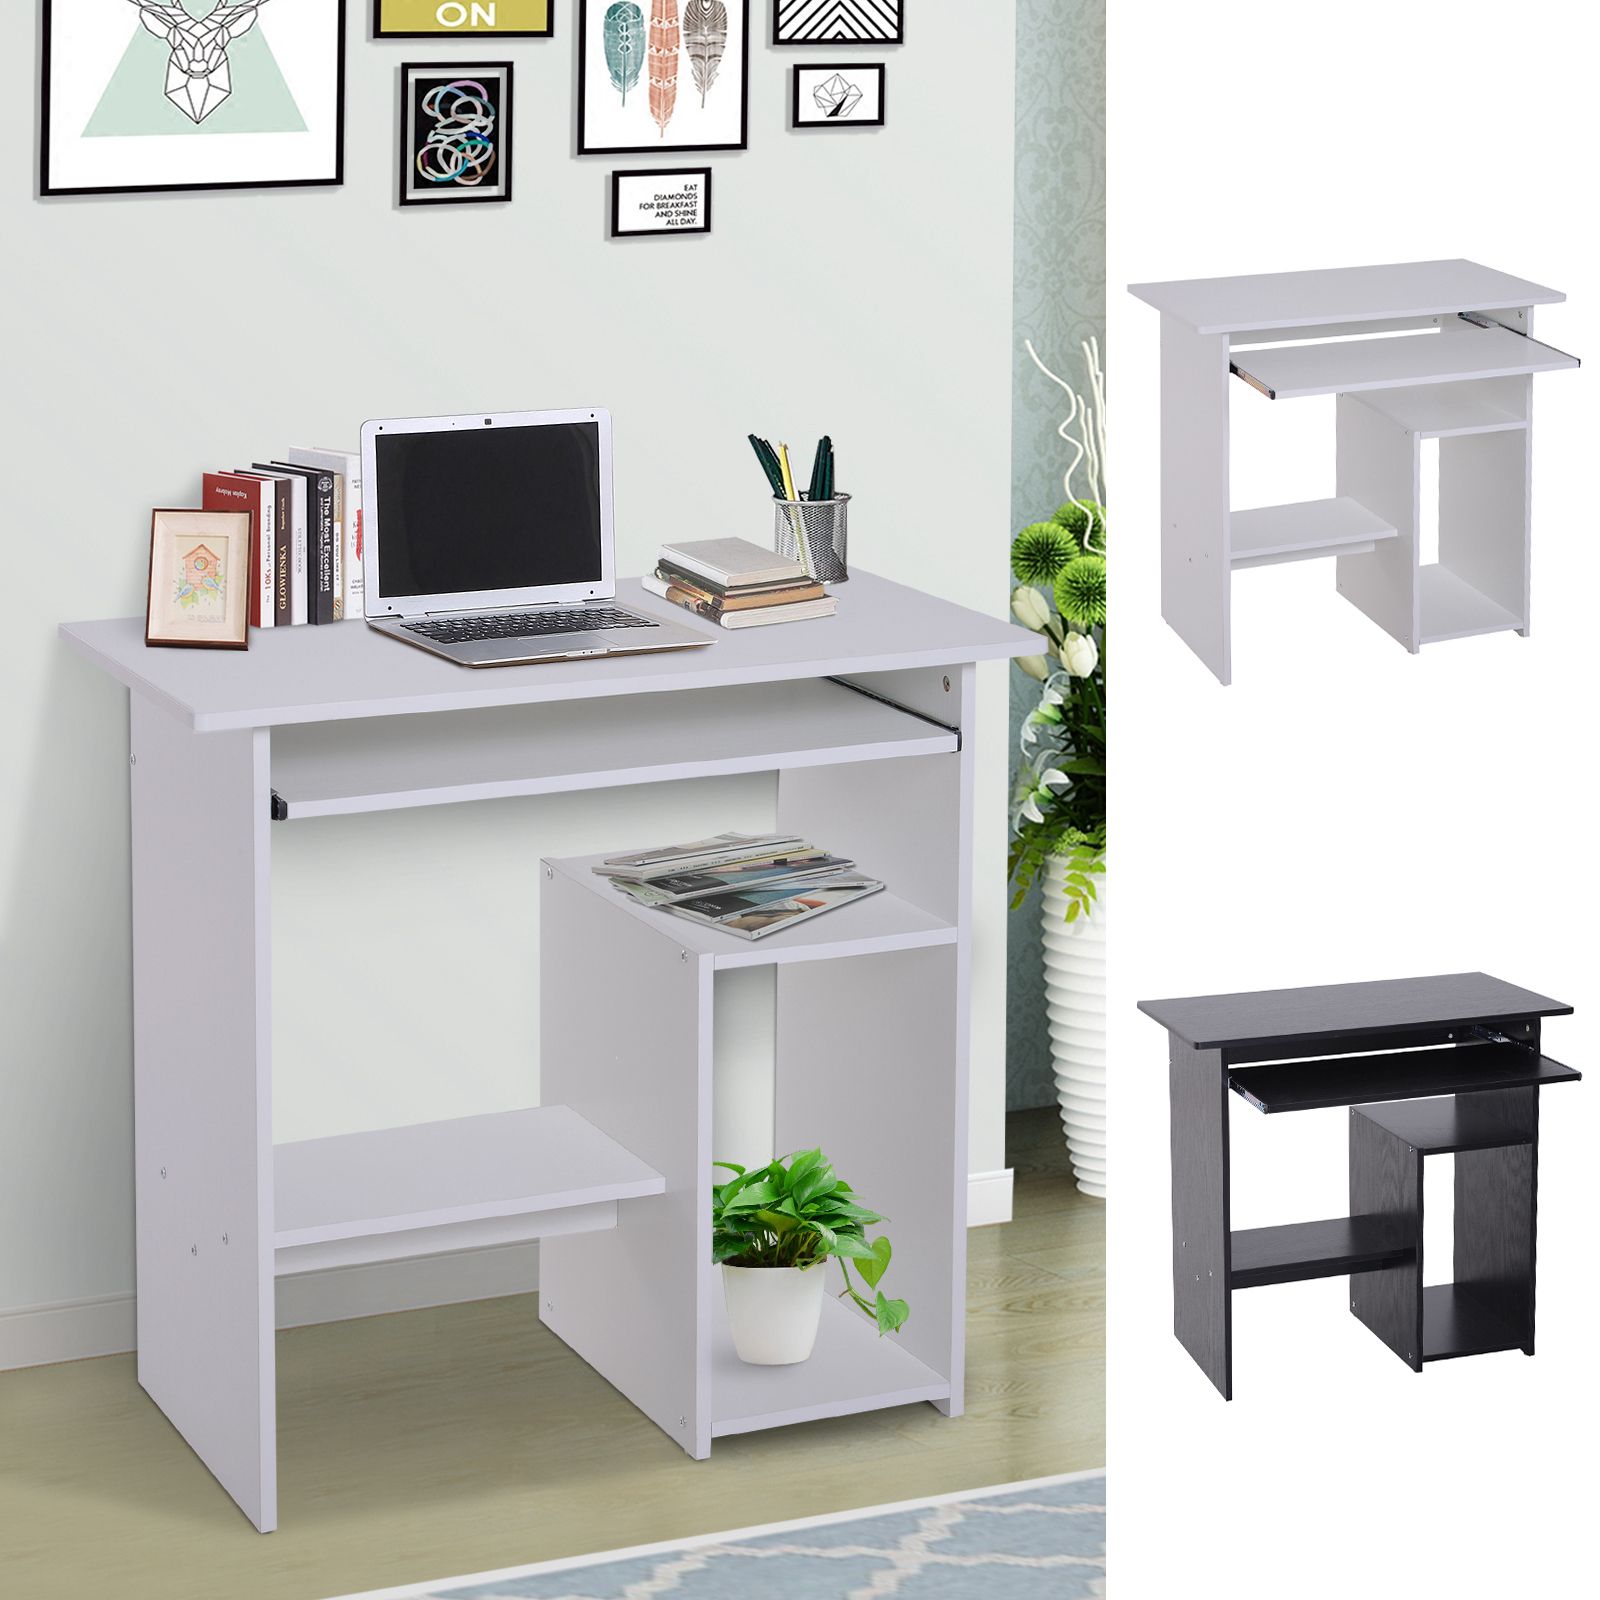 Compact Small Computer Table Wooden Desk Keyboard Tray Storage Shelf With Regard To Corner Desks With Keyboard Shelf (View 3 of 15)